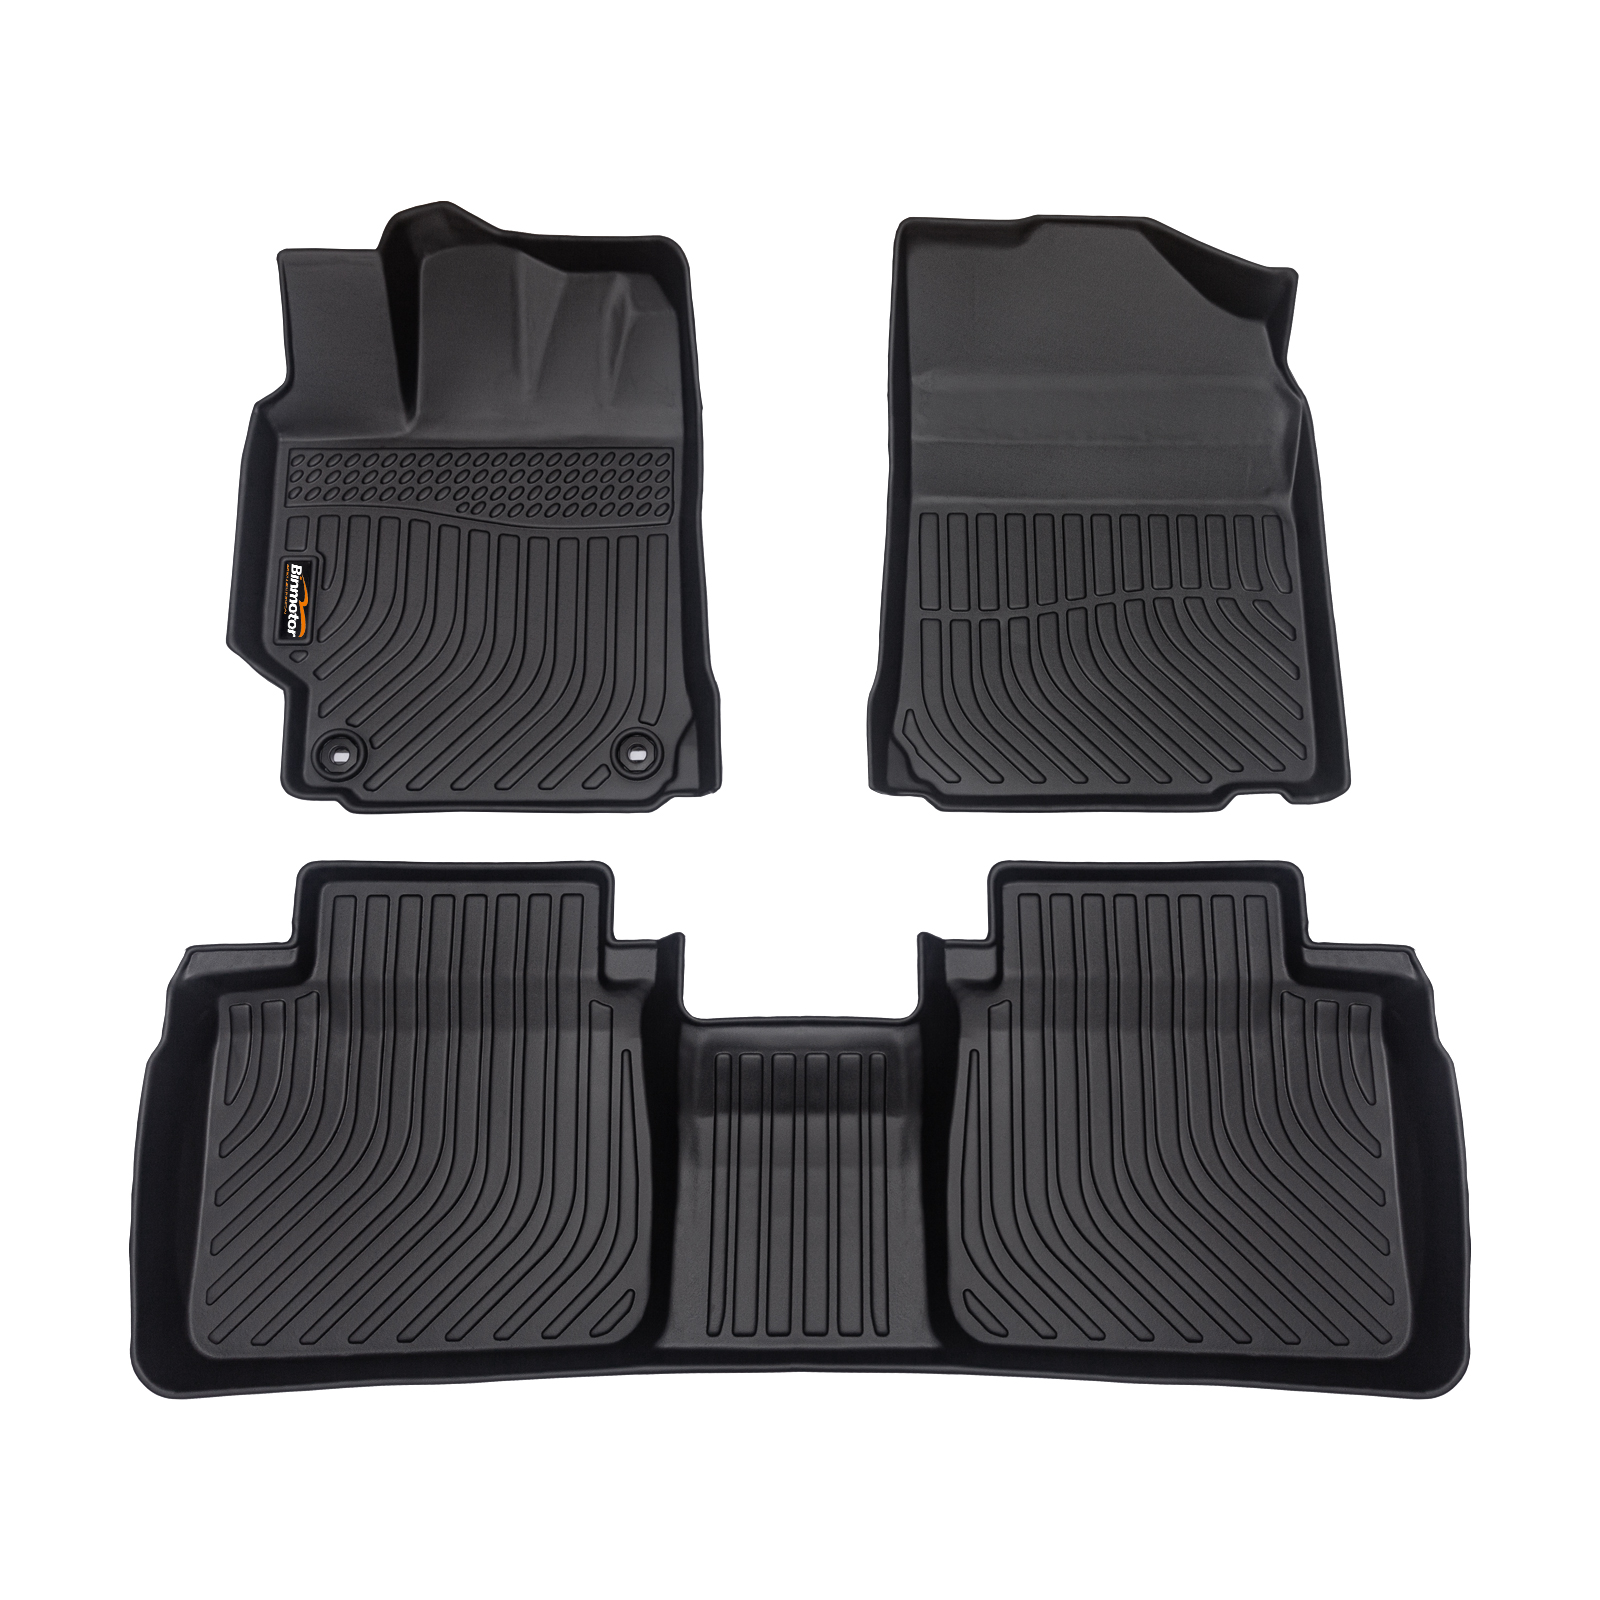 Binmotor- Floor Mats for Camry，Front & 2nd Row，TPE All Weather Car Accessories Mats for Toyota Camry，Custom Fit for Toyota Camry Floor Liners Waterproof, Nonslip (compatible year 2012-2017)